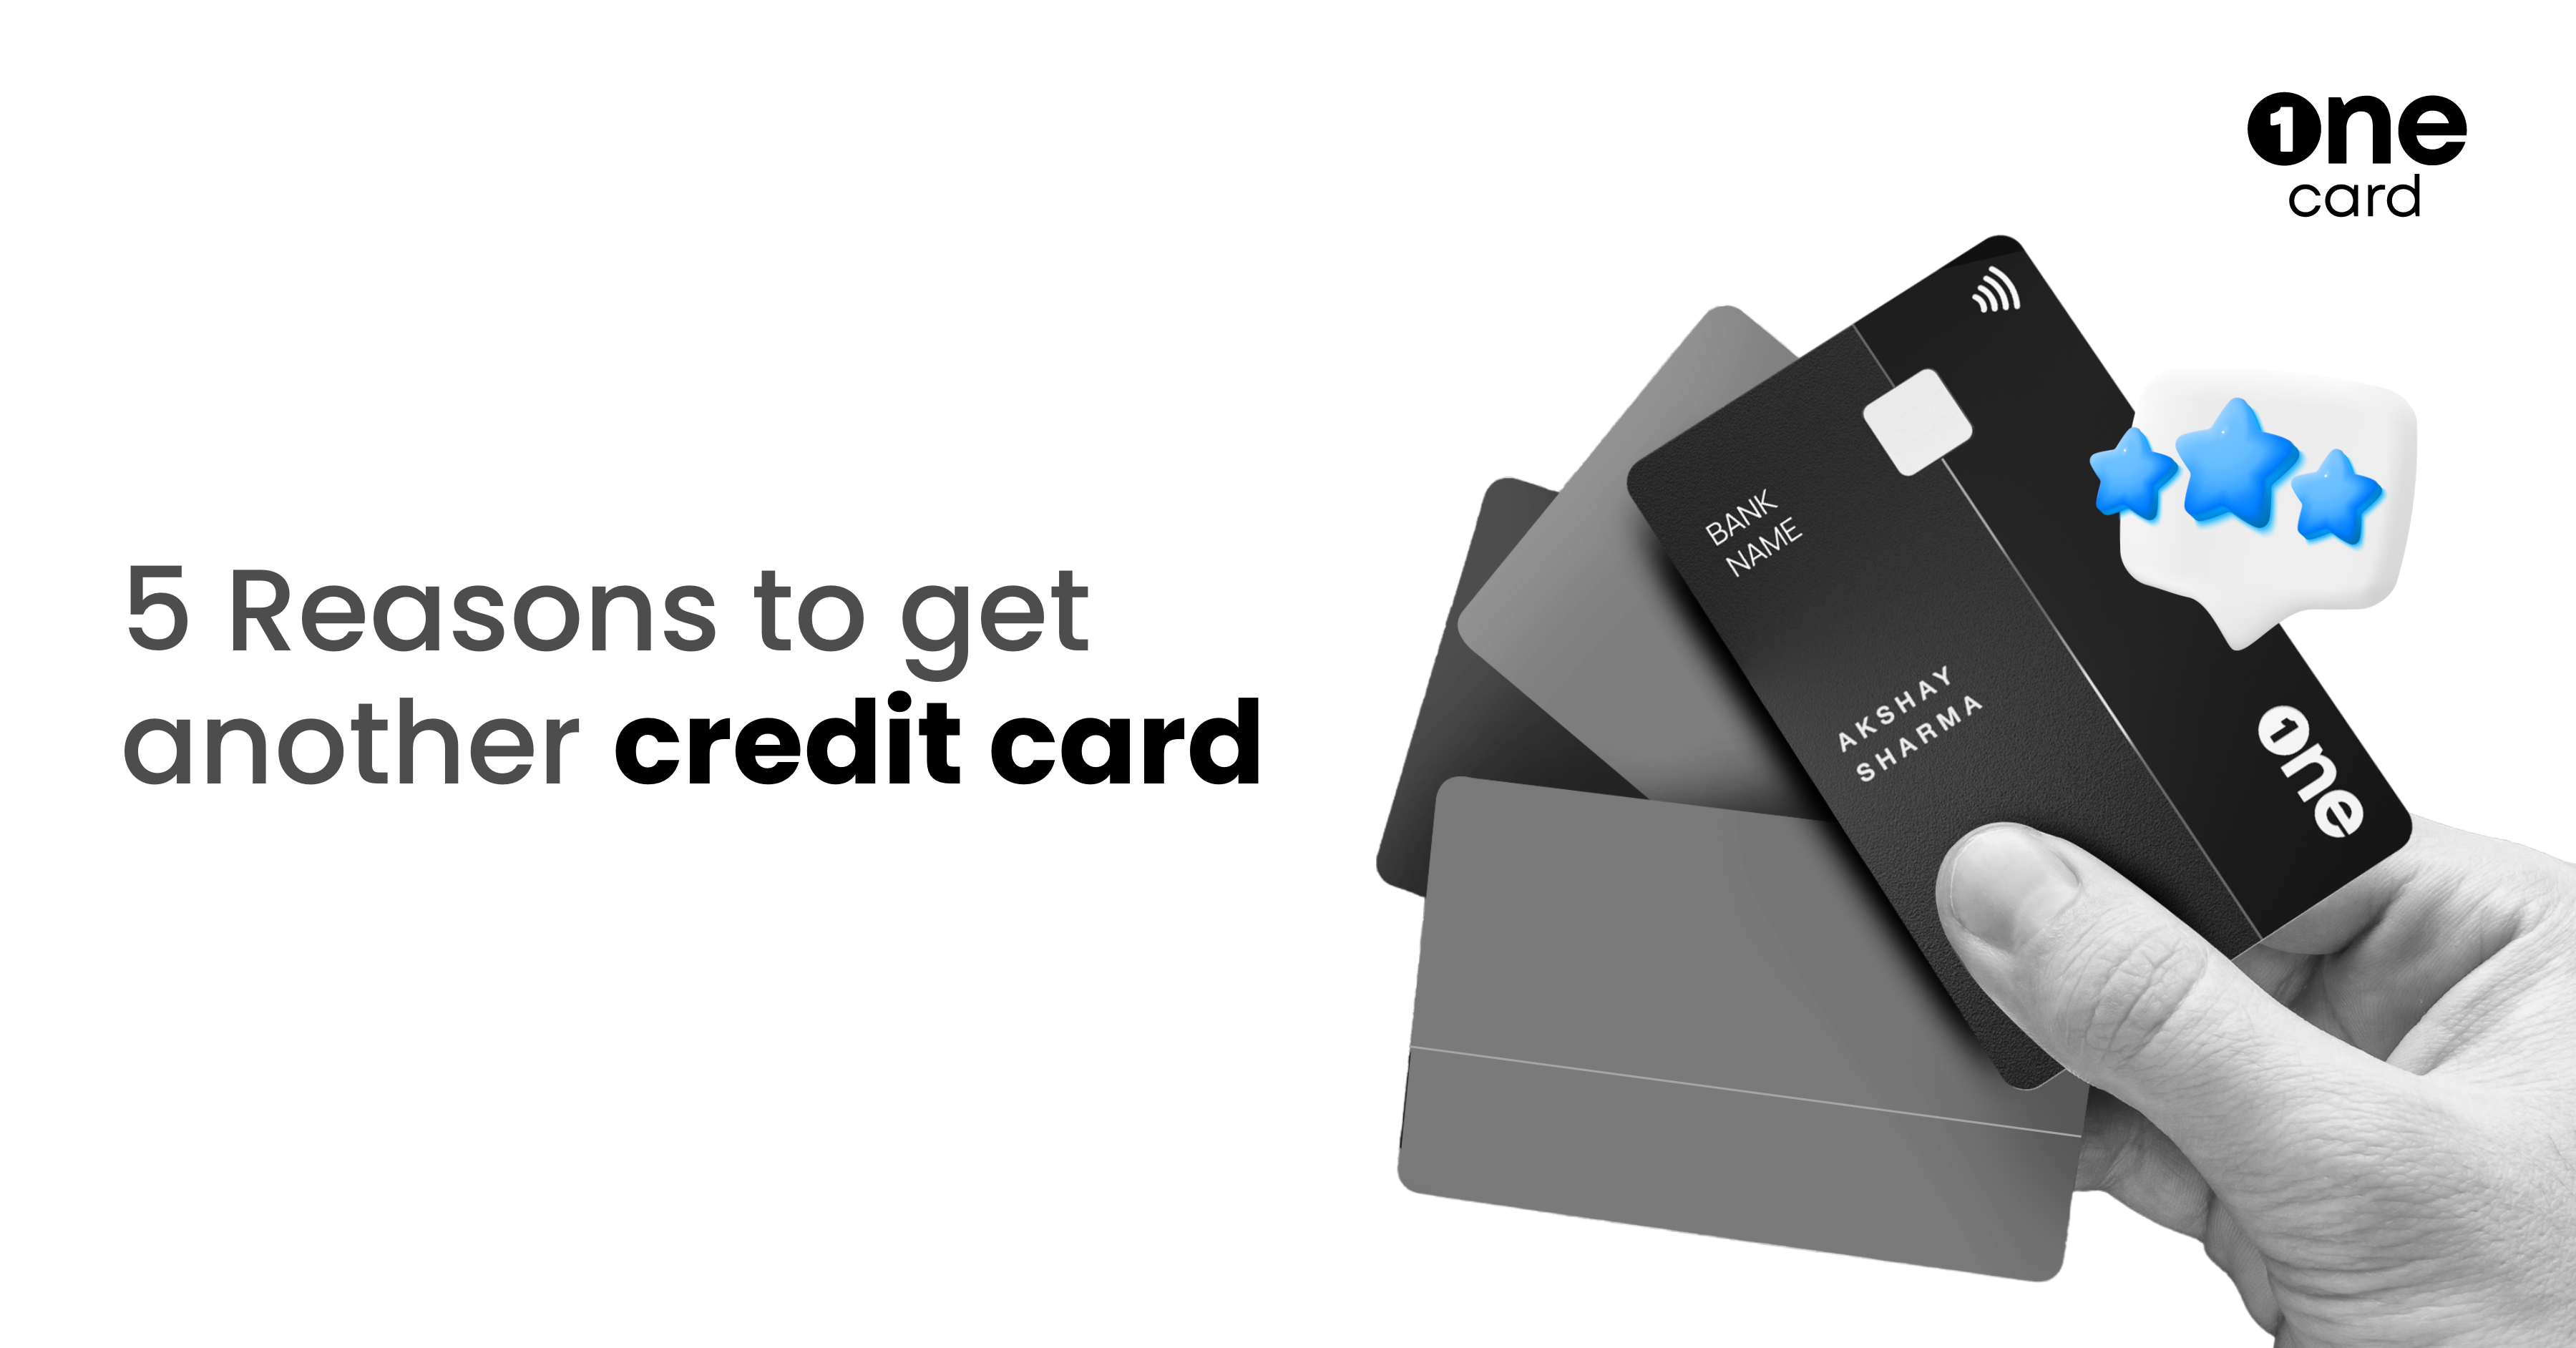 Why you should get another credit card?